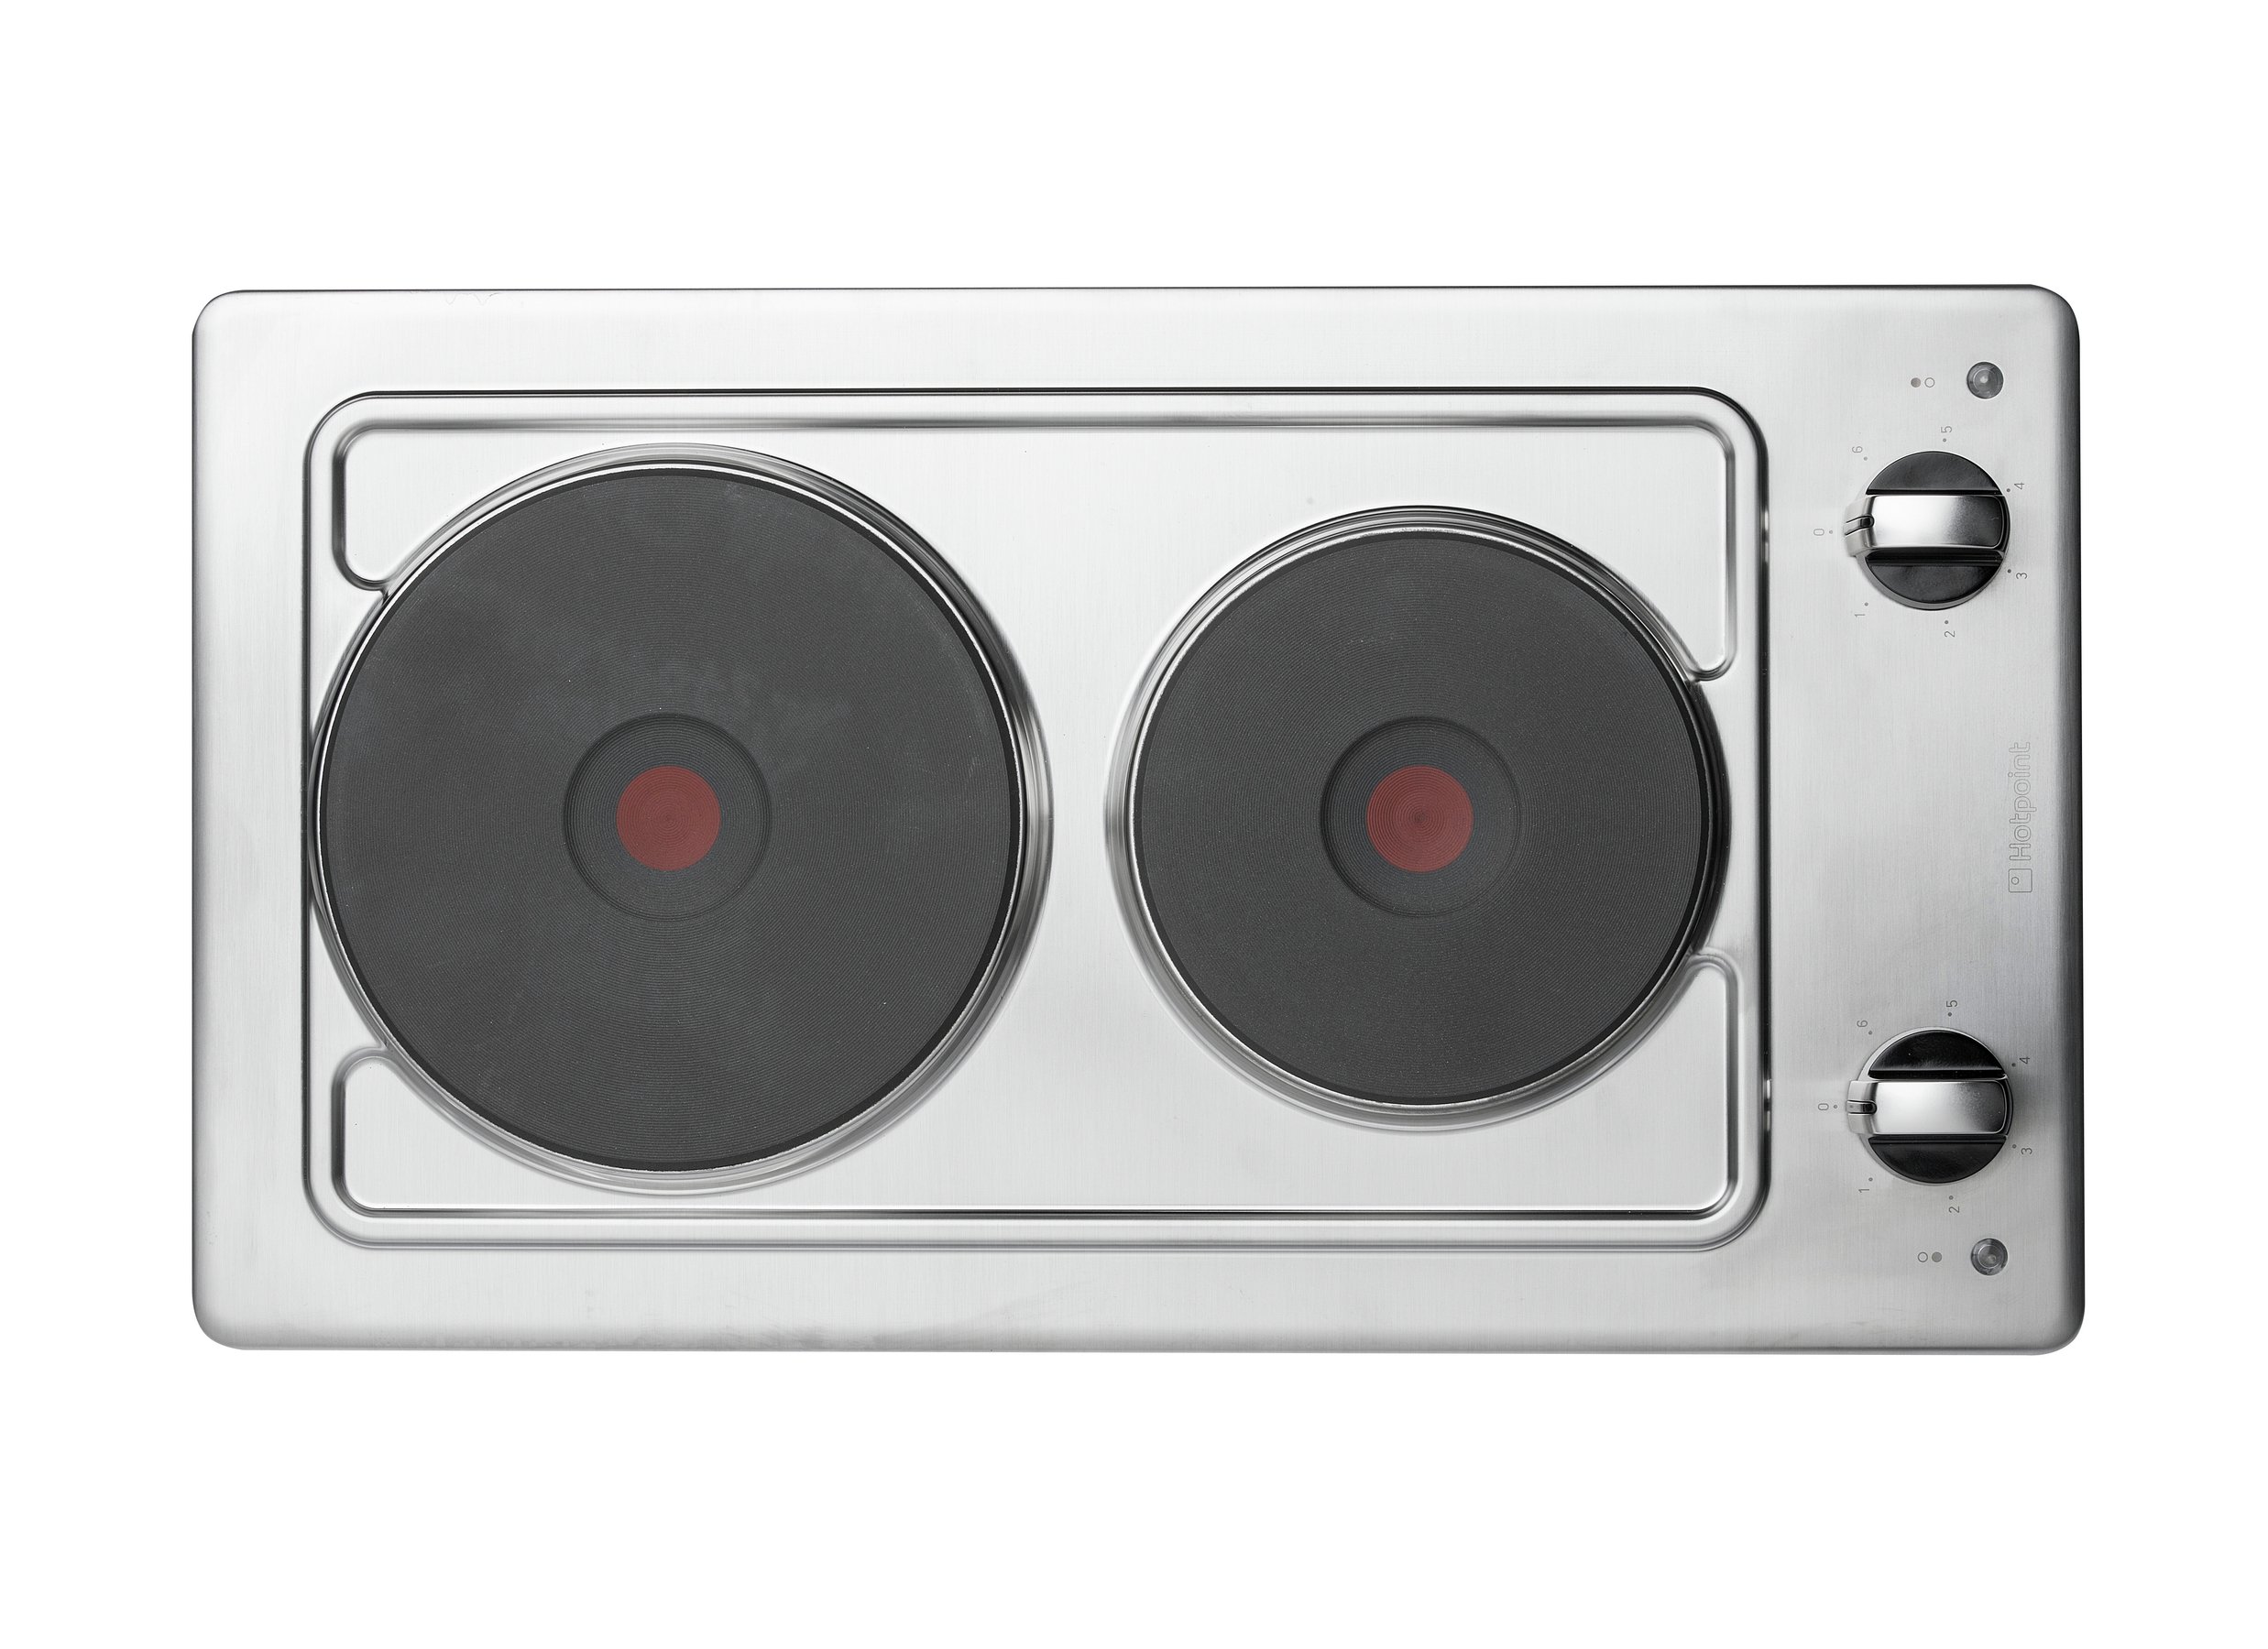 Hotpoint E320SKIX Solid Plate Electric Hob - Stainless Steel